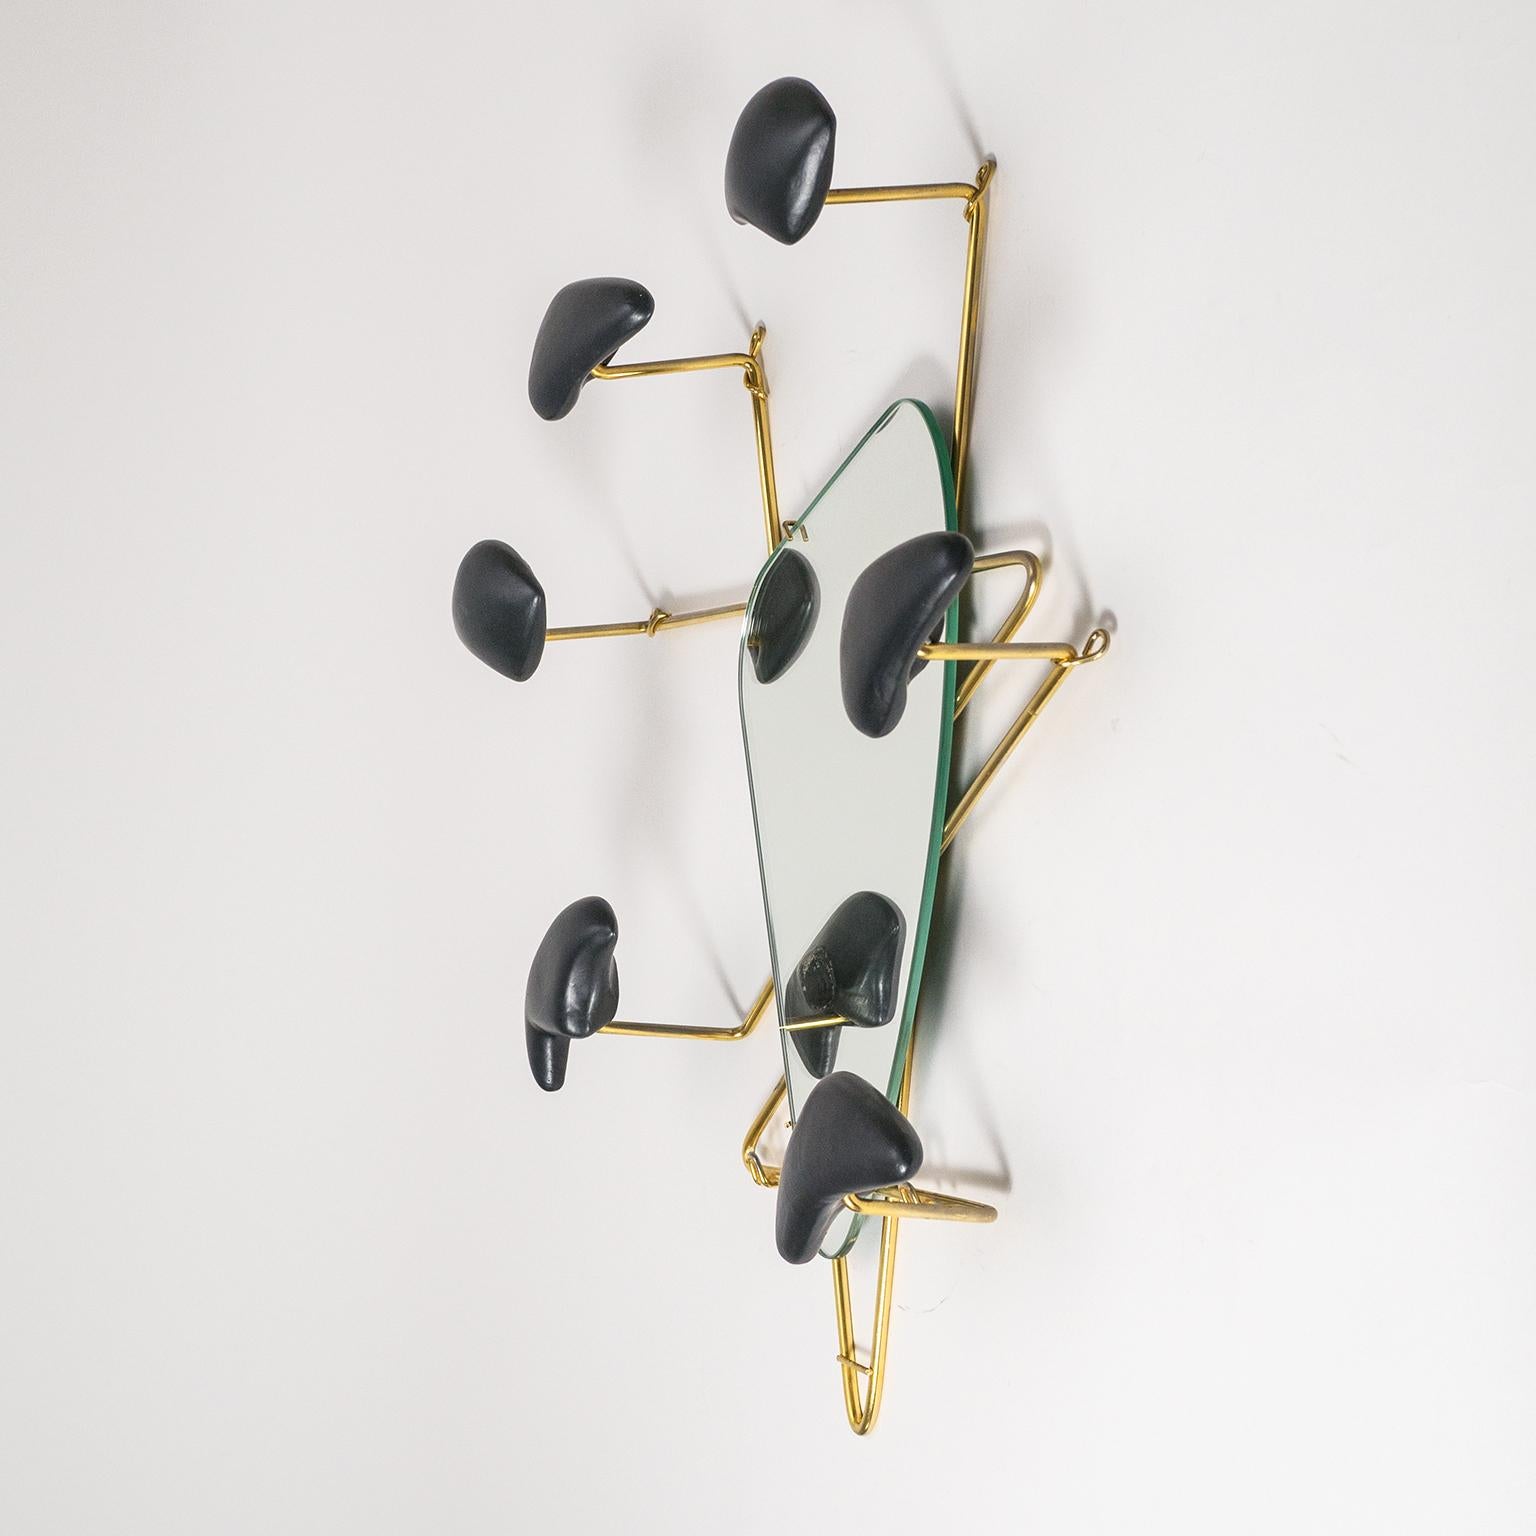 Mid-20th Century Georges Jouvé Wall-Mounted Coat Rack with Mirror, 1950s